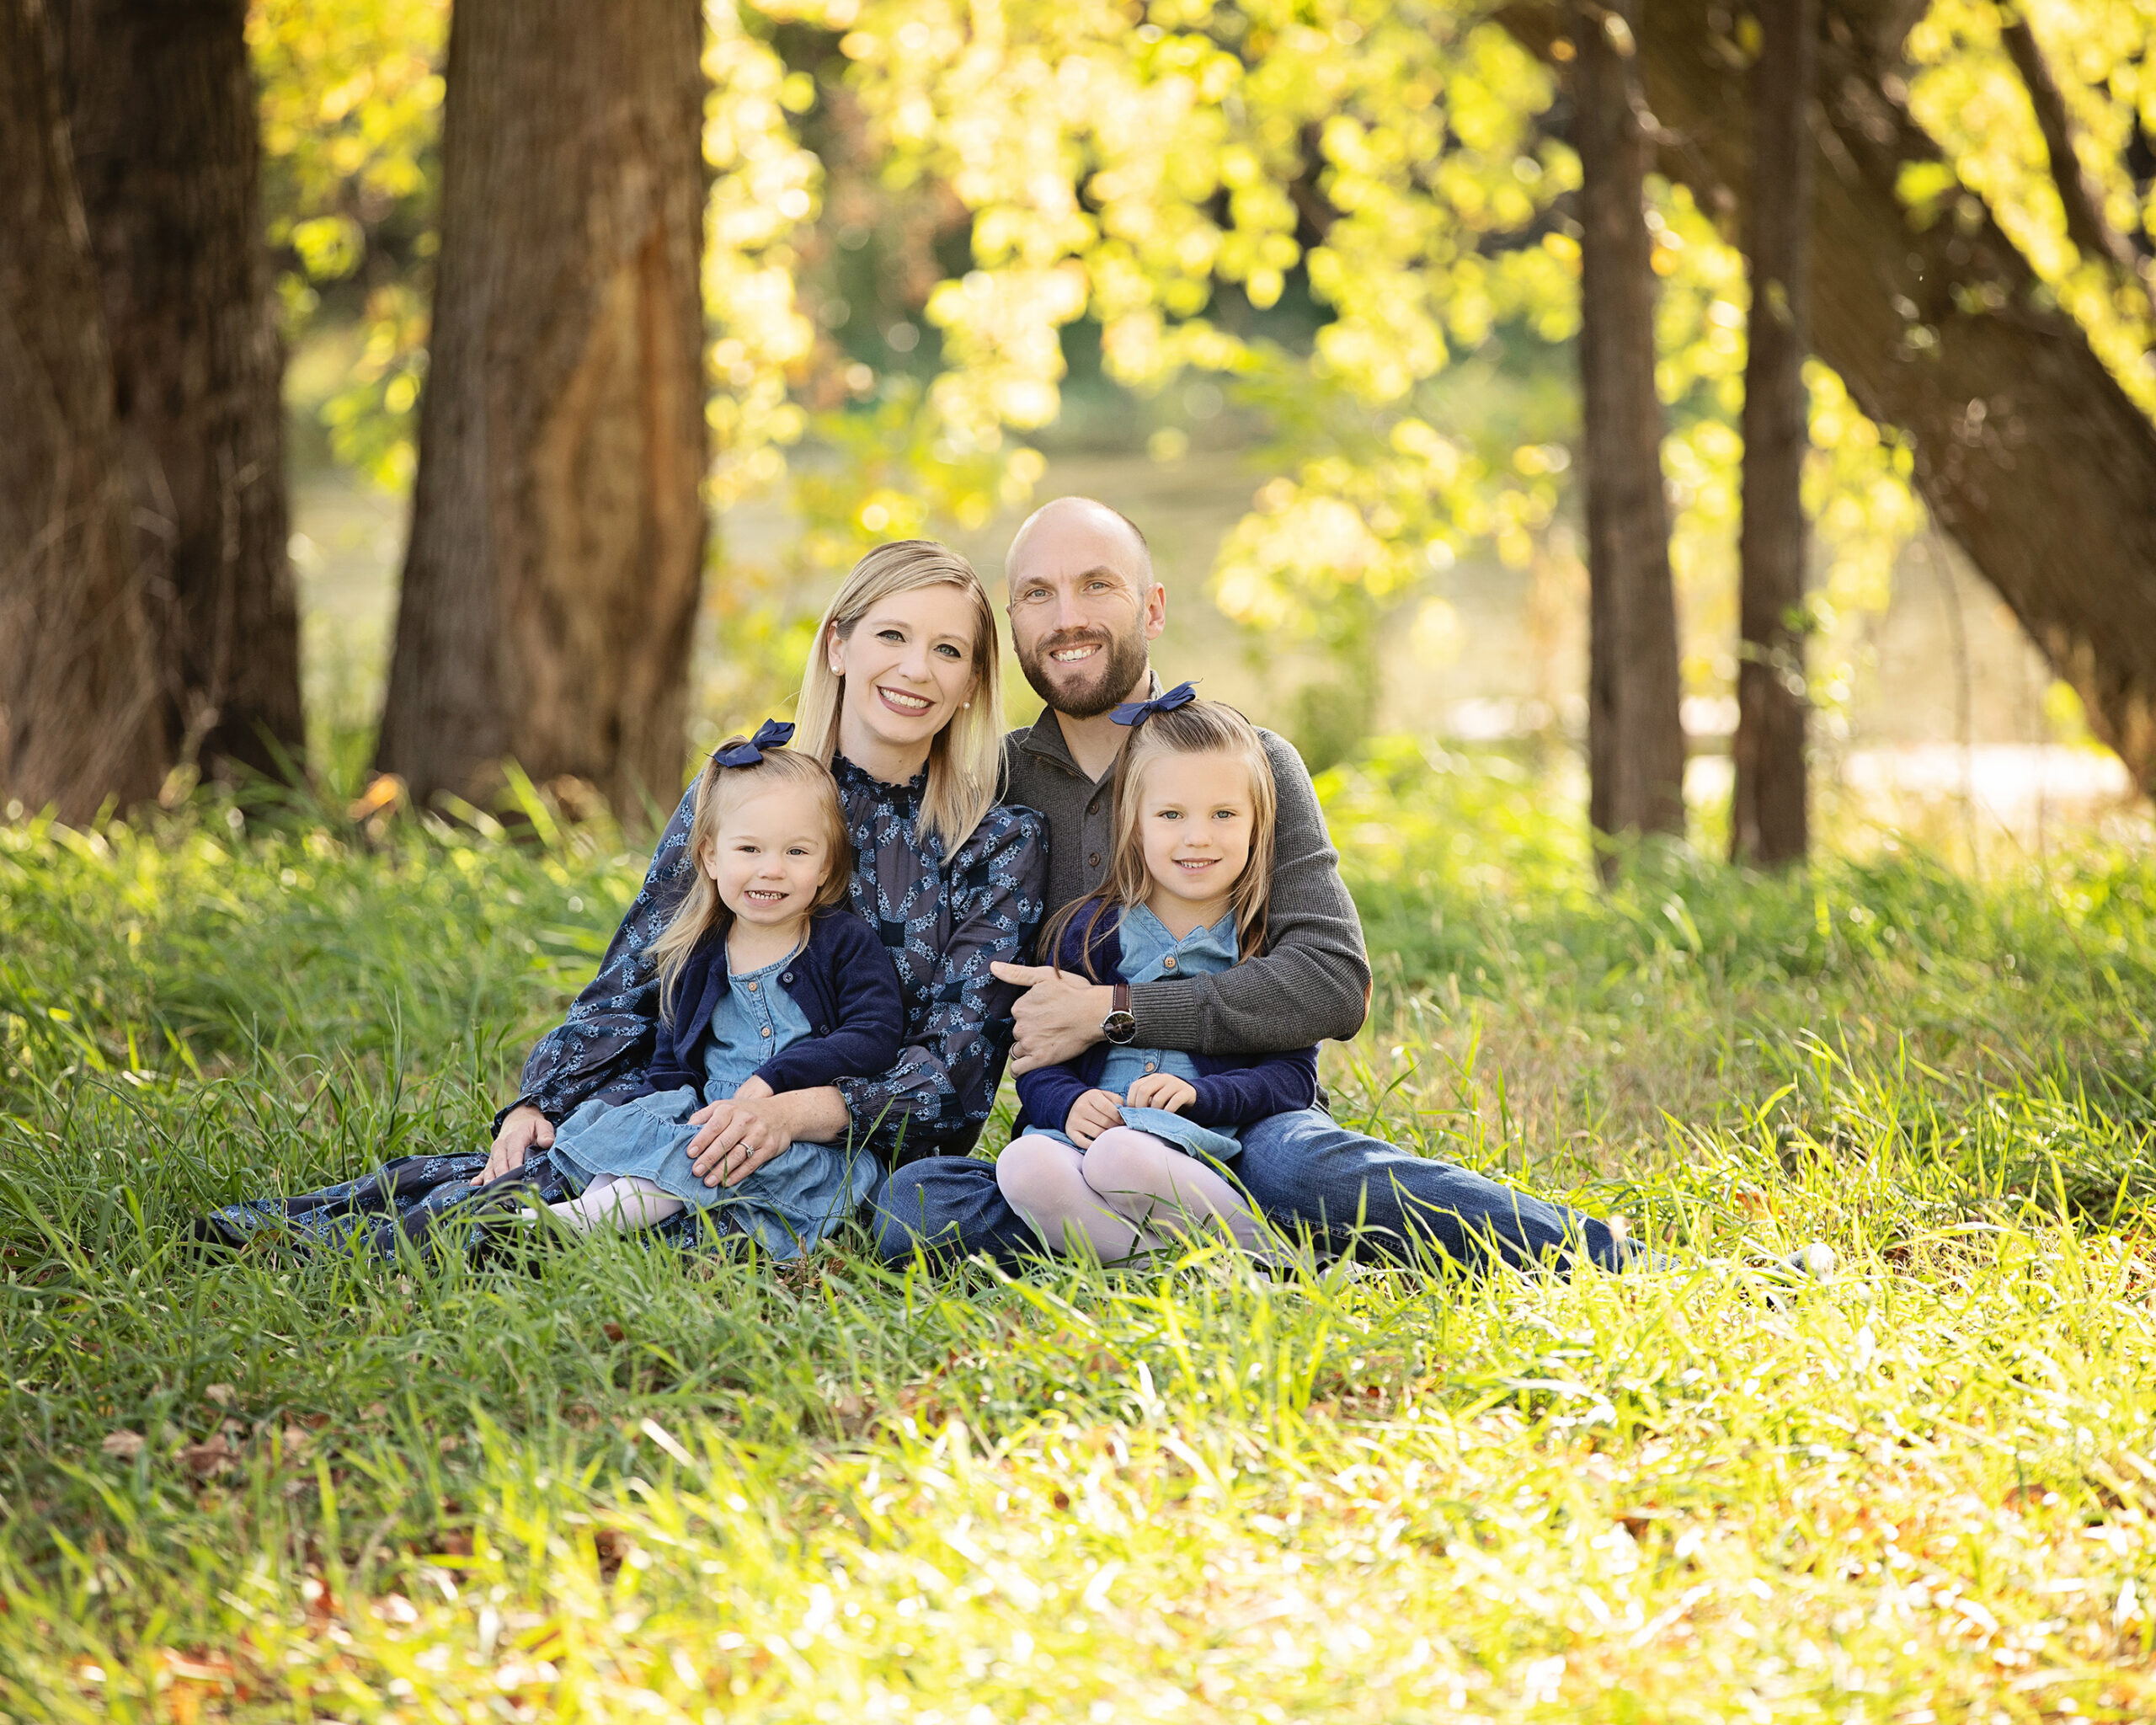 The Complete Checklist for Family Photo Shoots